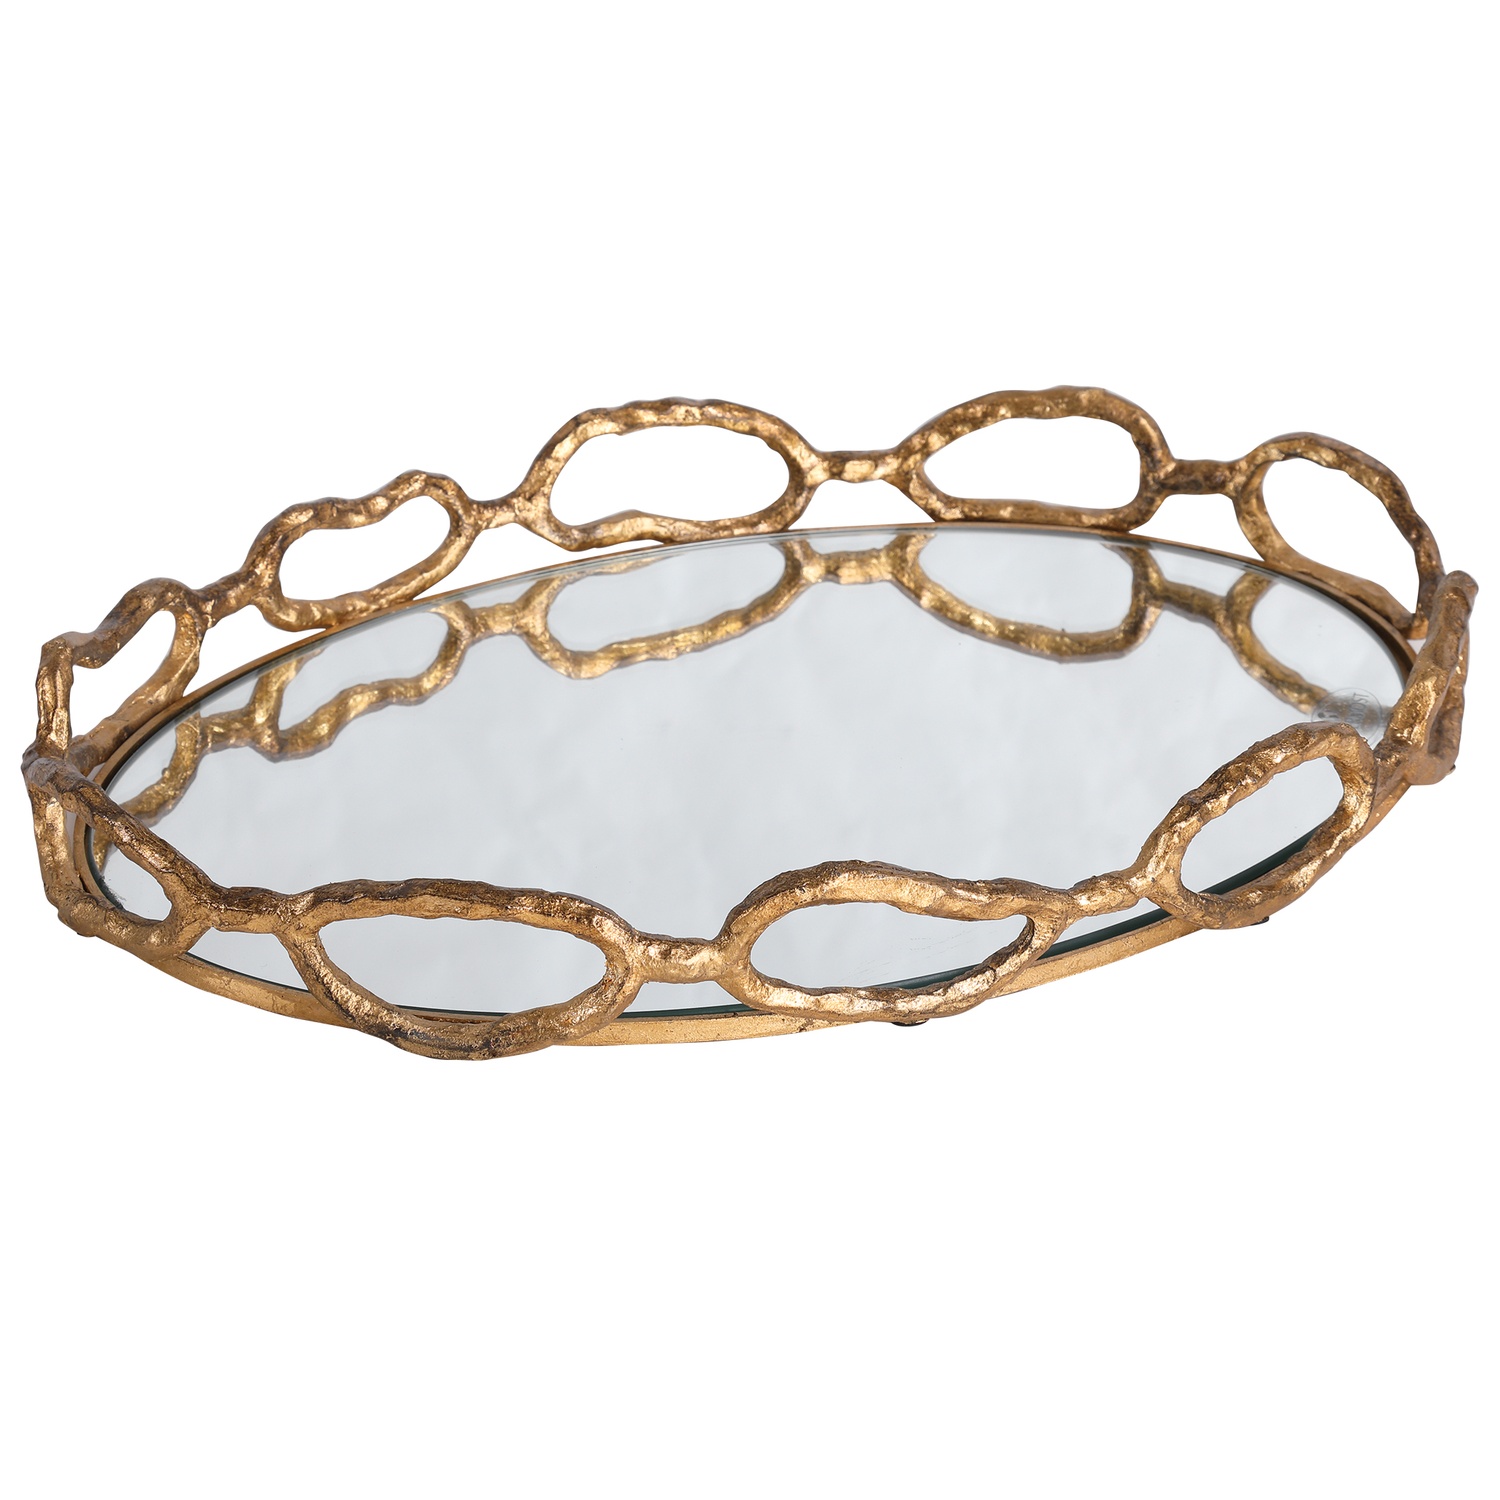 Cable-Decorative Bowls & Trays